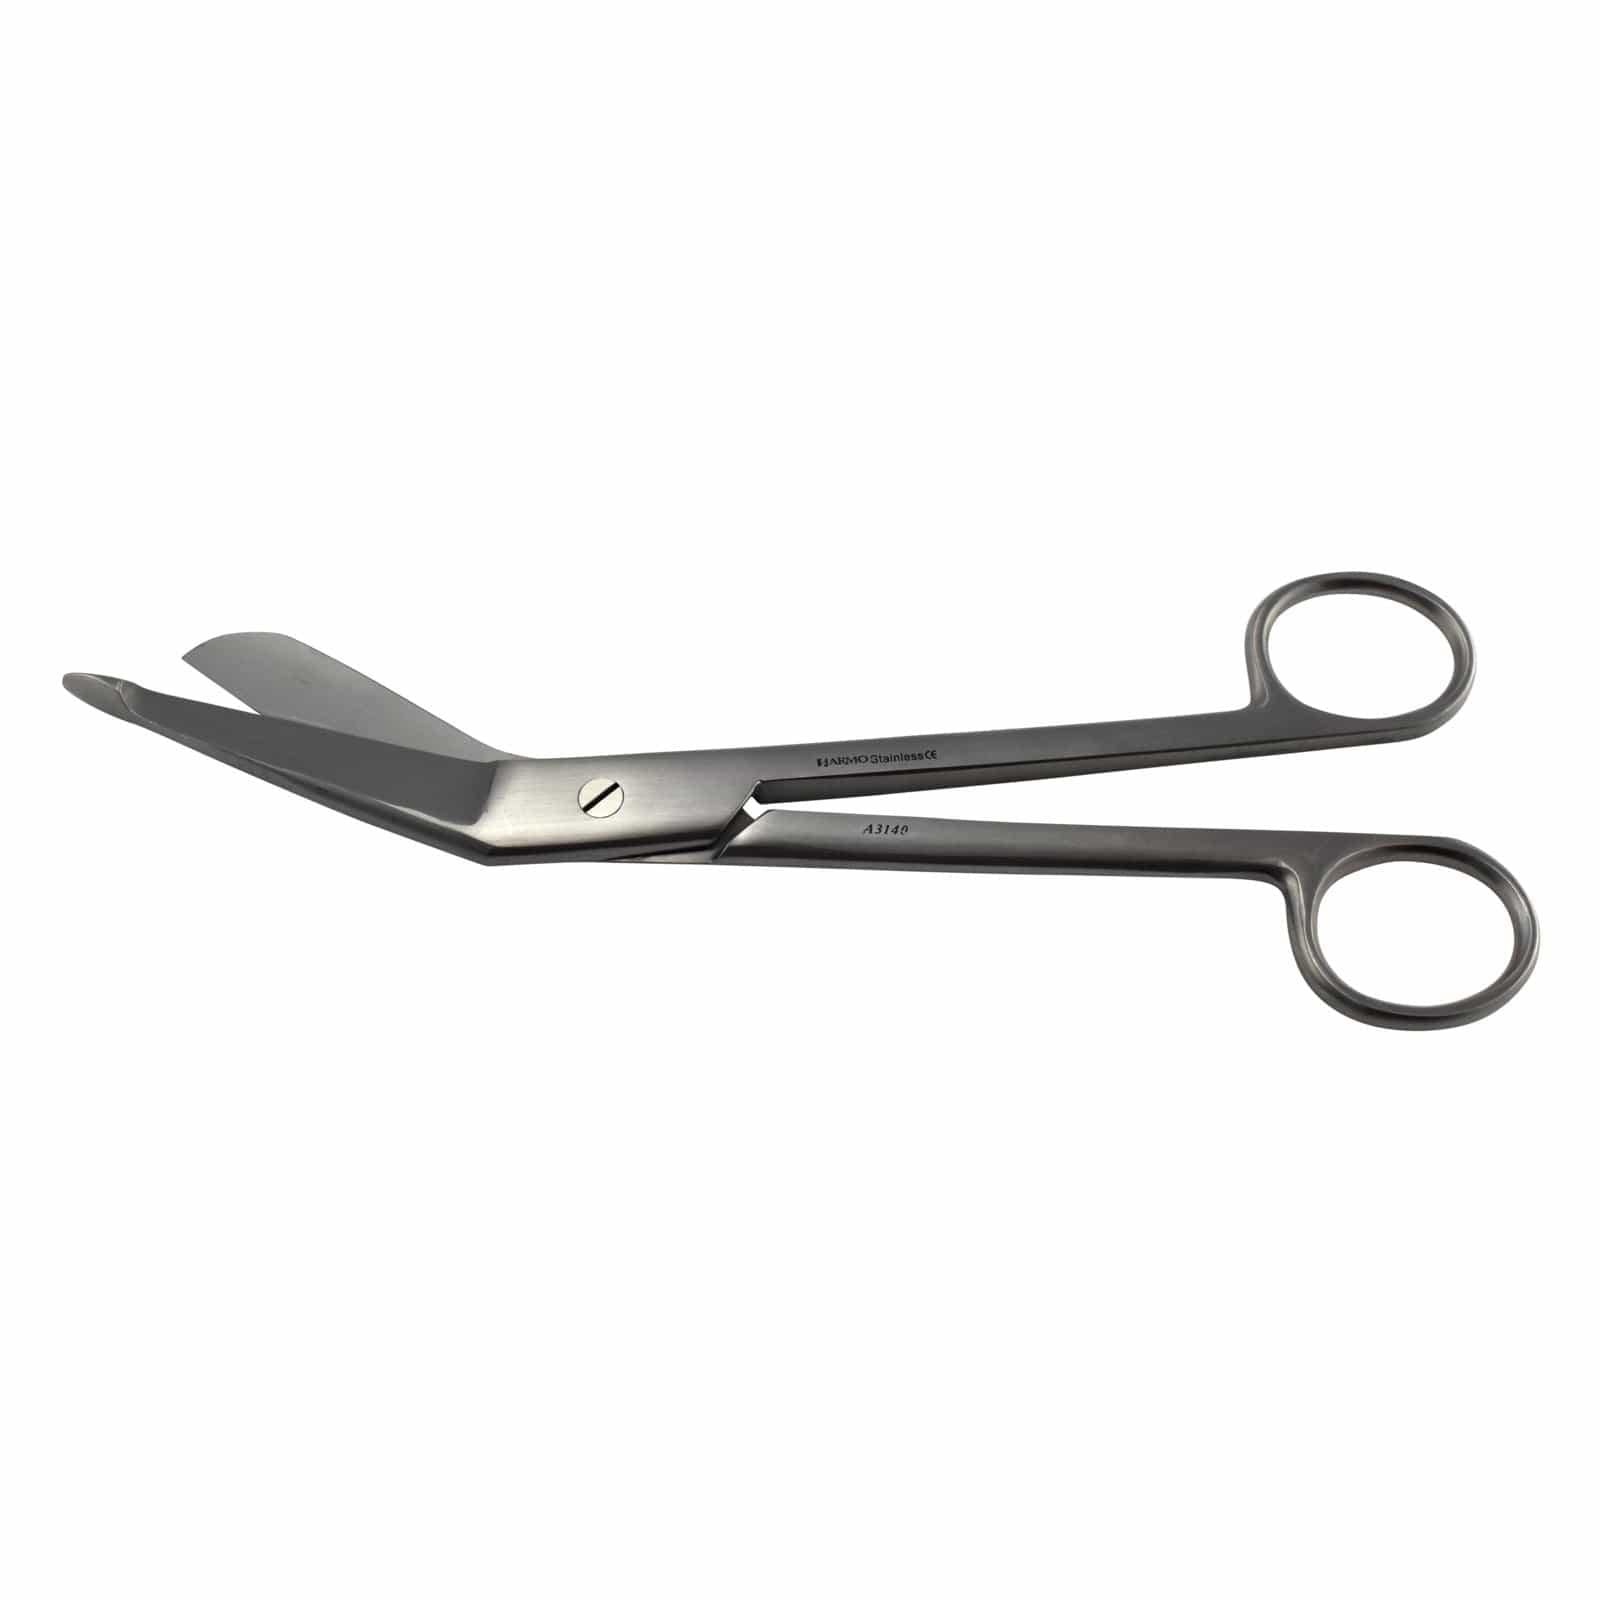 Armo Surgical Instruments 20cm Armo Scissors Bandage Lister